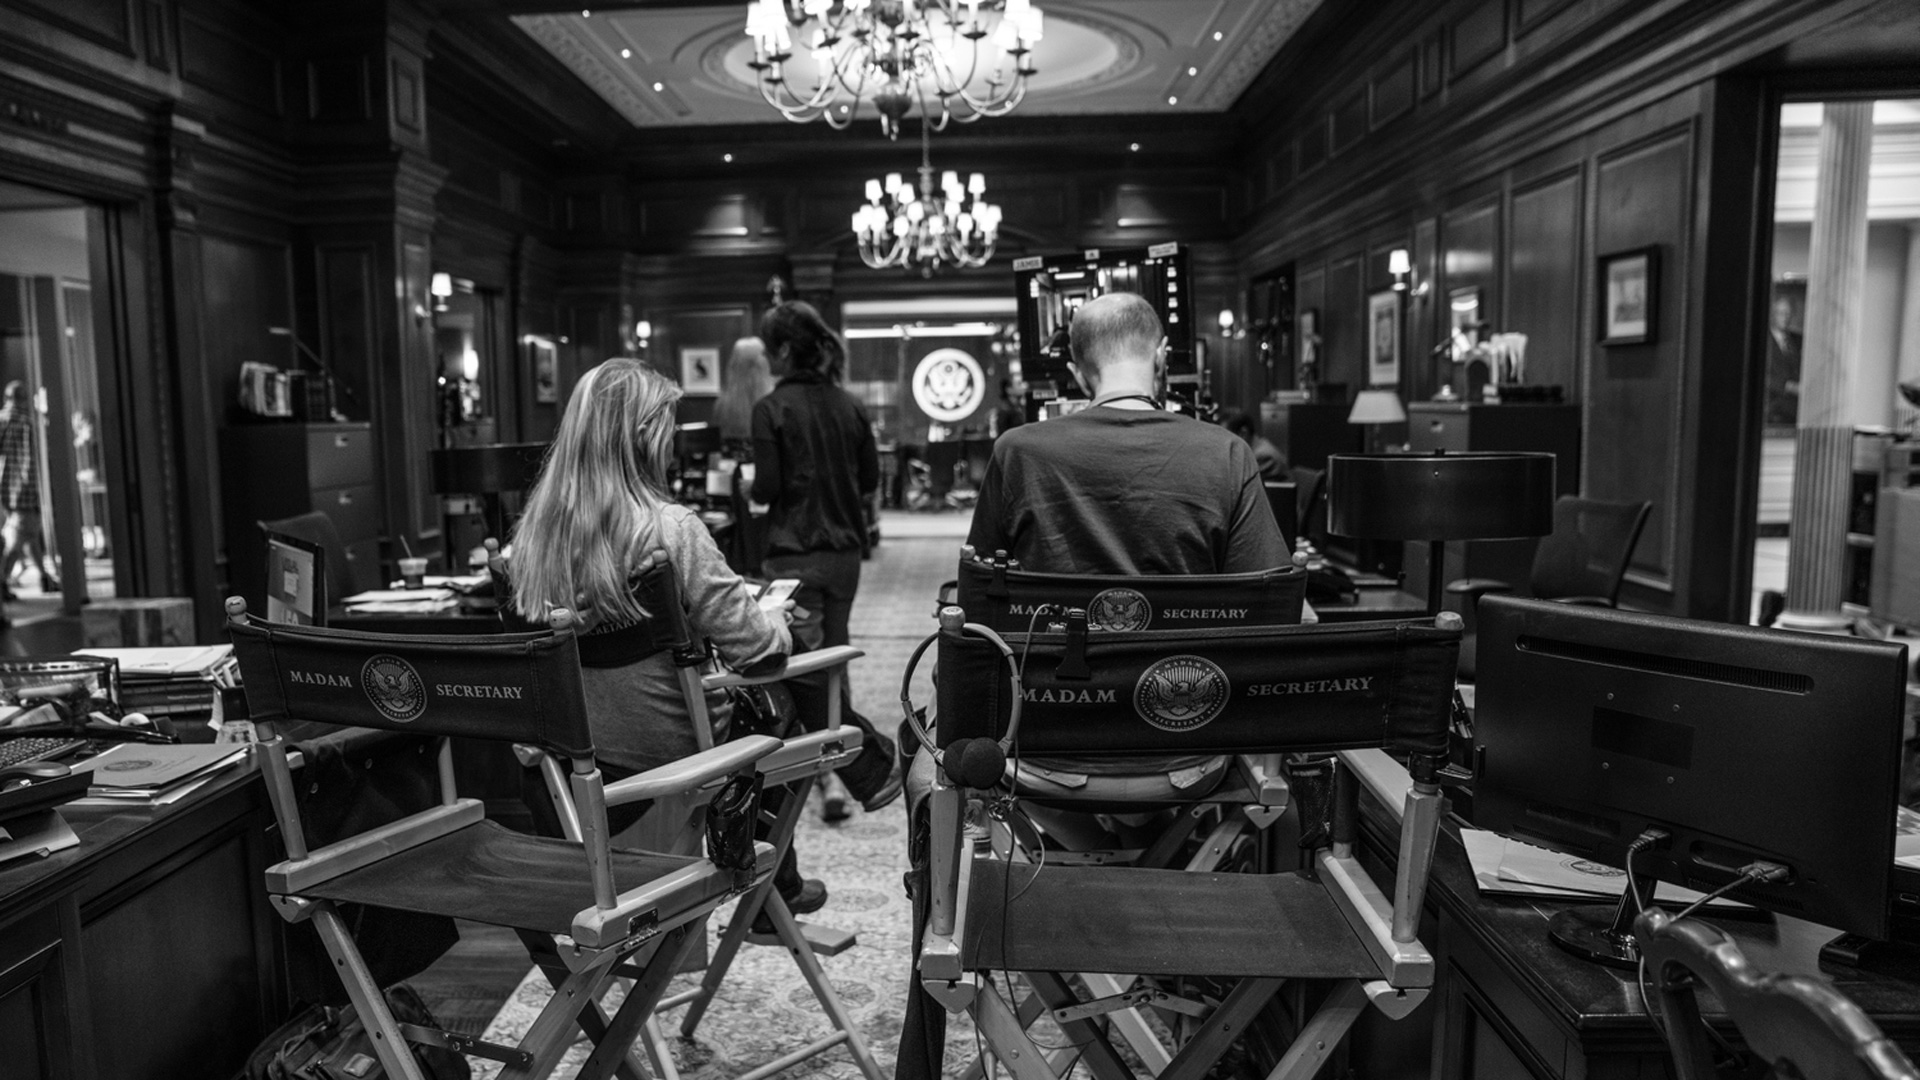 The Madam Secretary crew is hard at work in this black-and-white shot. 